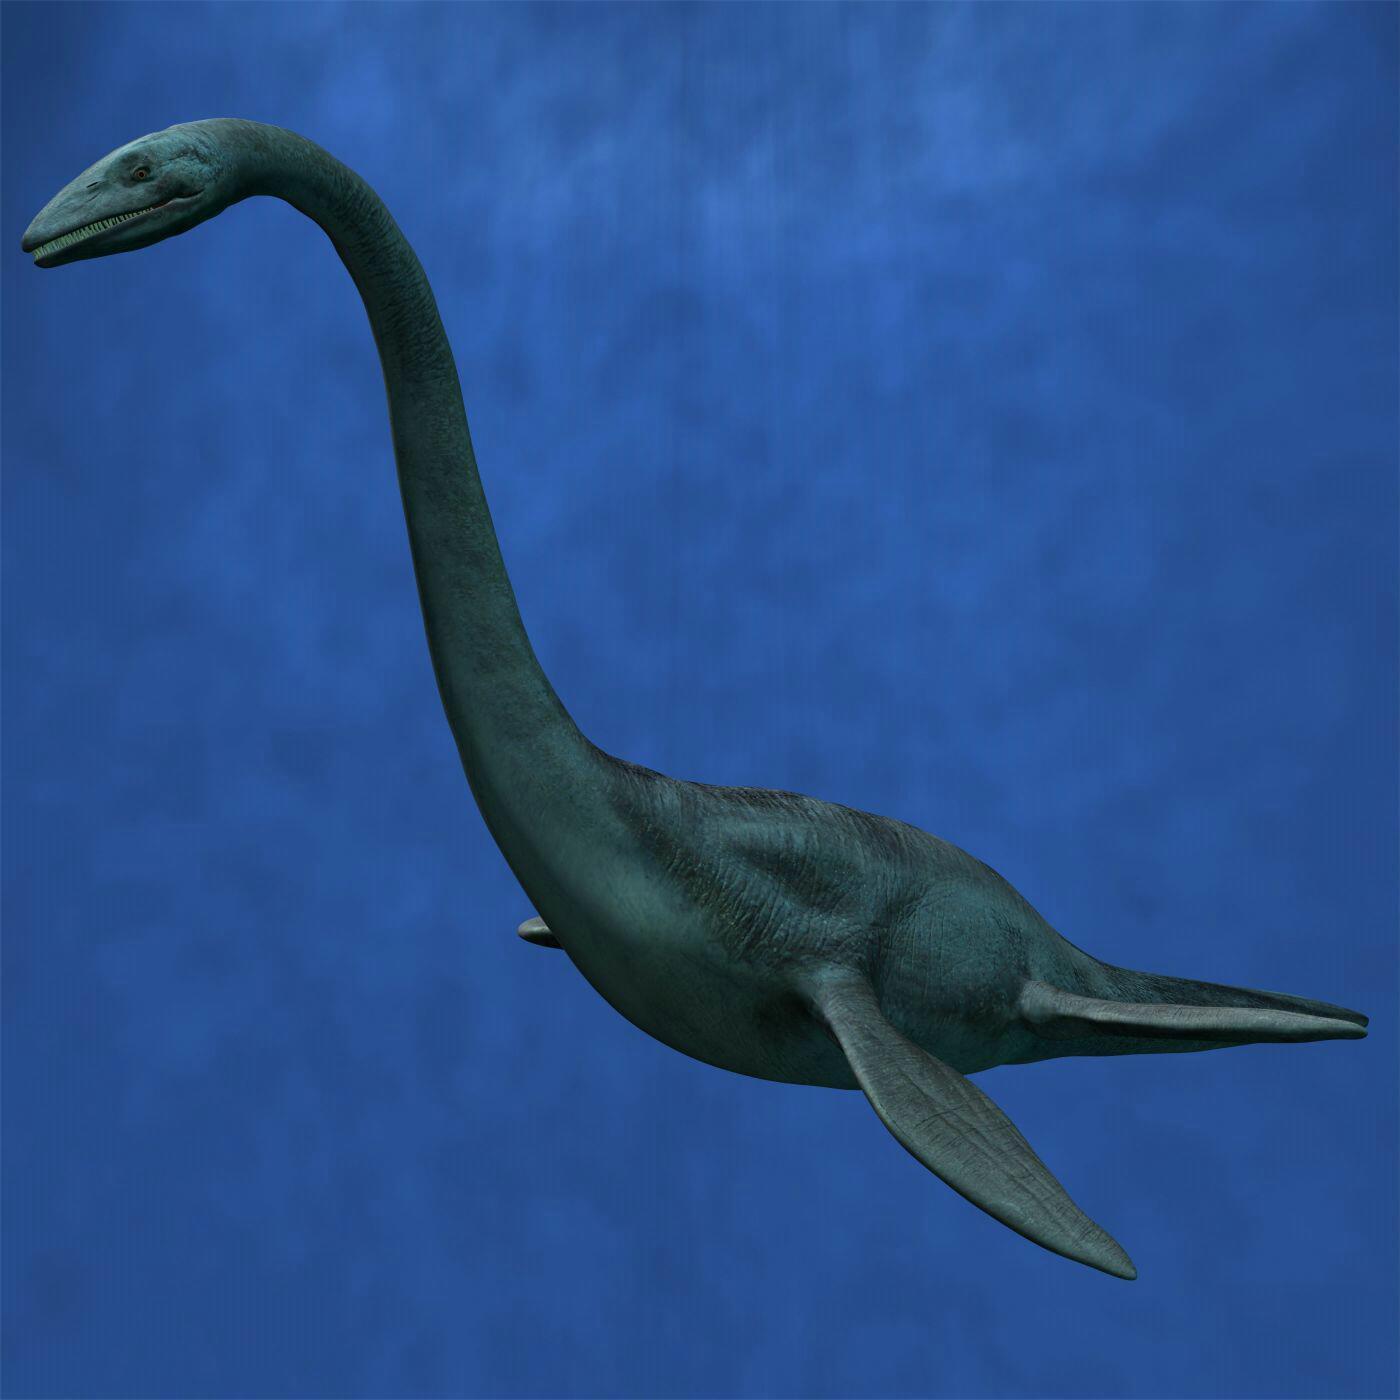 Loch Ness ‘Expert’ To Present Findings